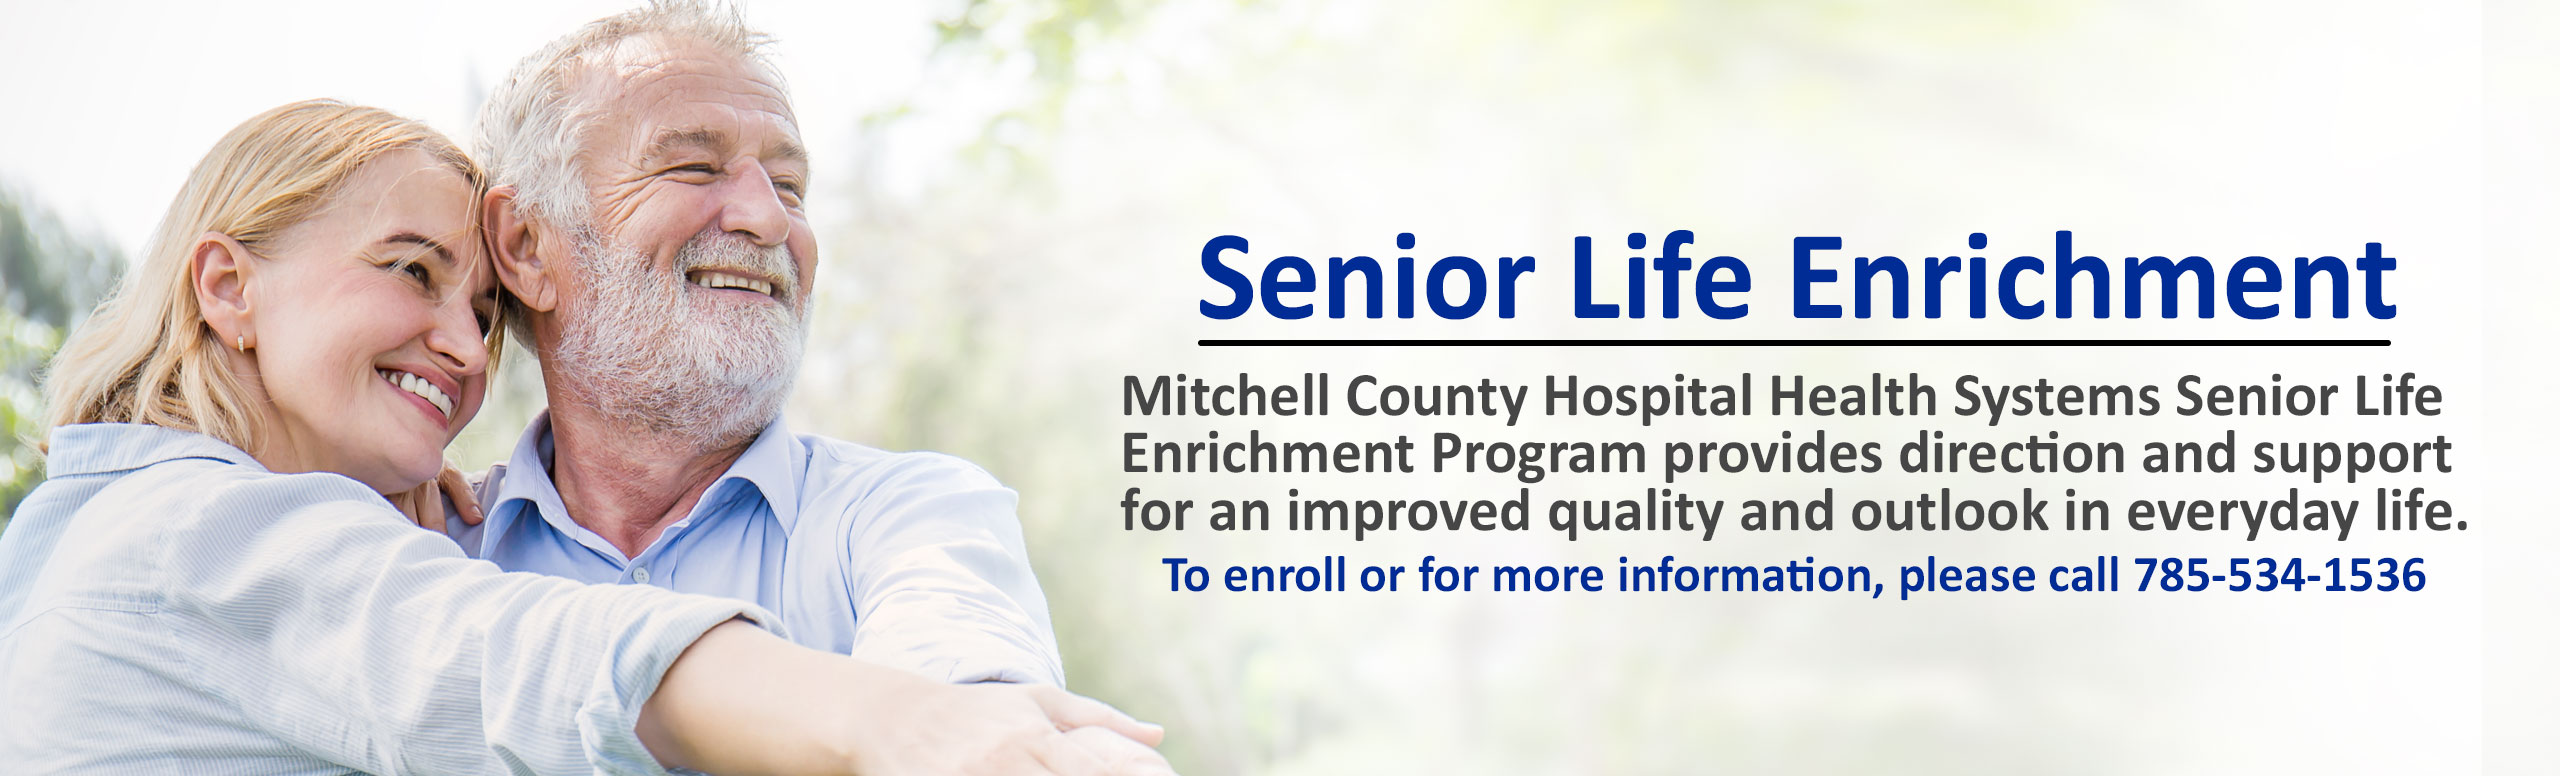 Senior Life Enrichment

Mitchell County Hospital Health System Senior Life Enrichment Program provides direction and support for an improved quality and outlook in everyday life.
To enroll or for more information, please call 785-534-1536